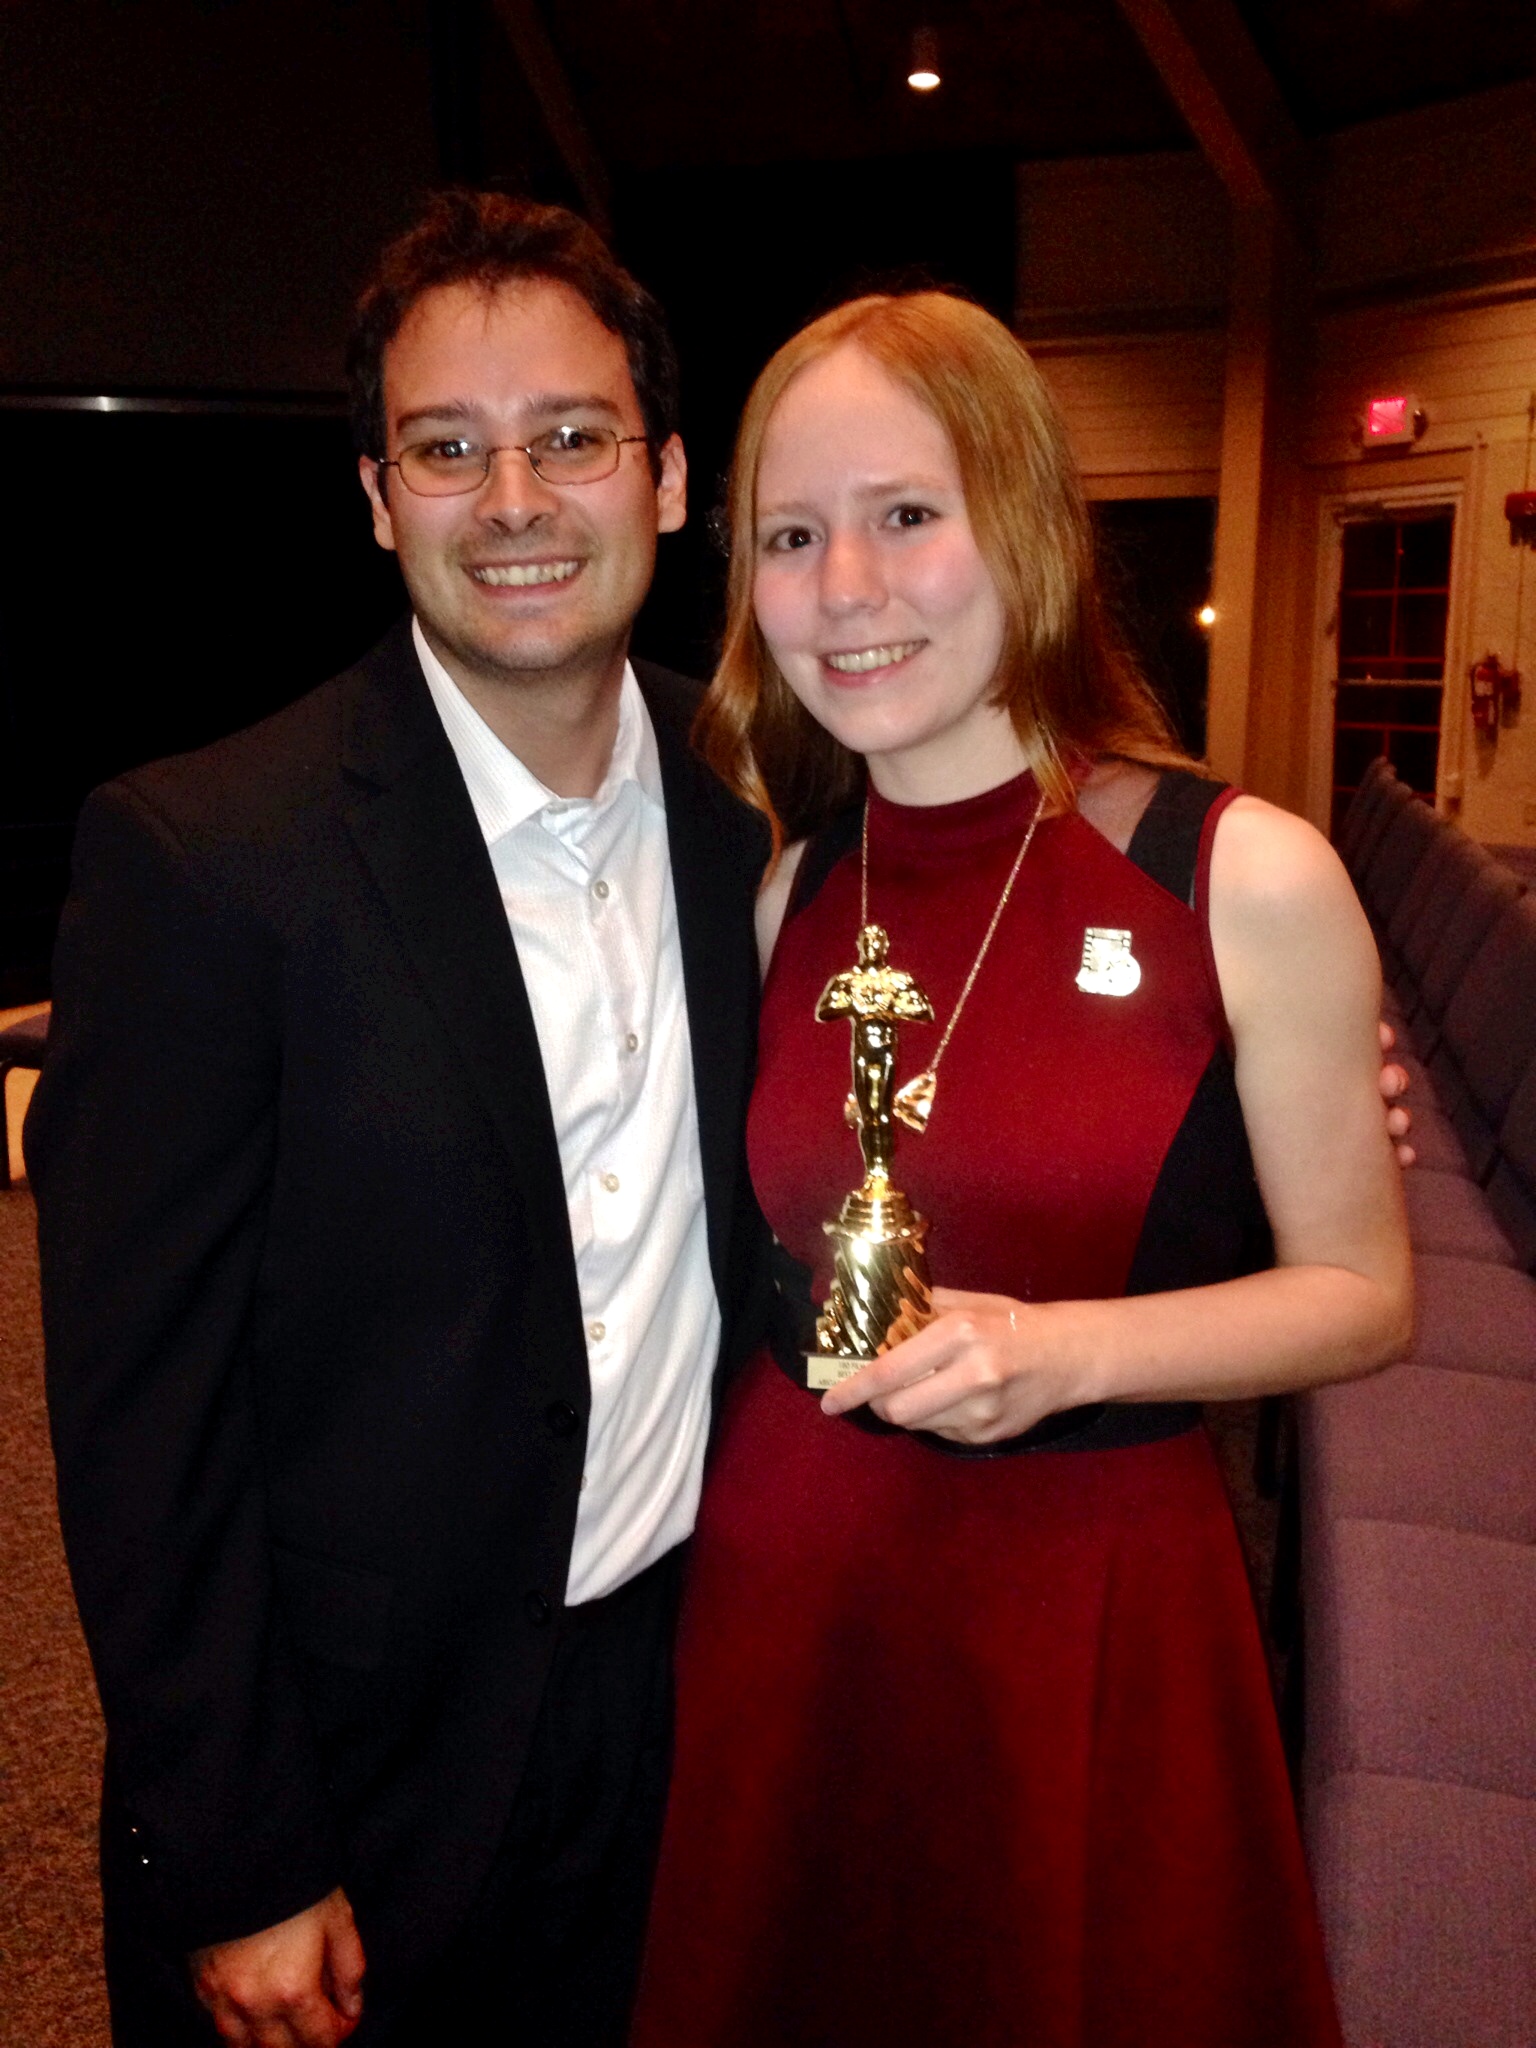 Abigail Rodriguez after winning Best Editor for a 6min Film in the 2014 180 Film Festival standing alongside editor and film maker James Tikunoff.